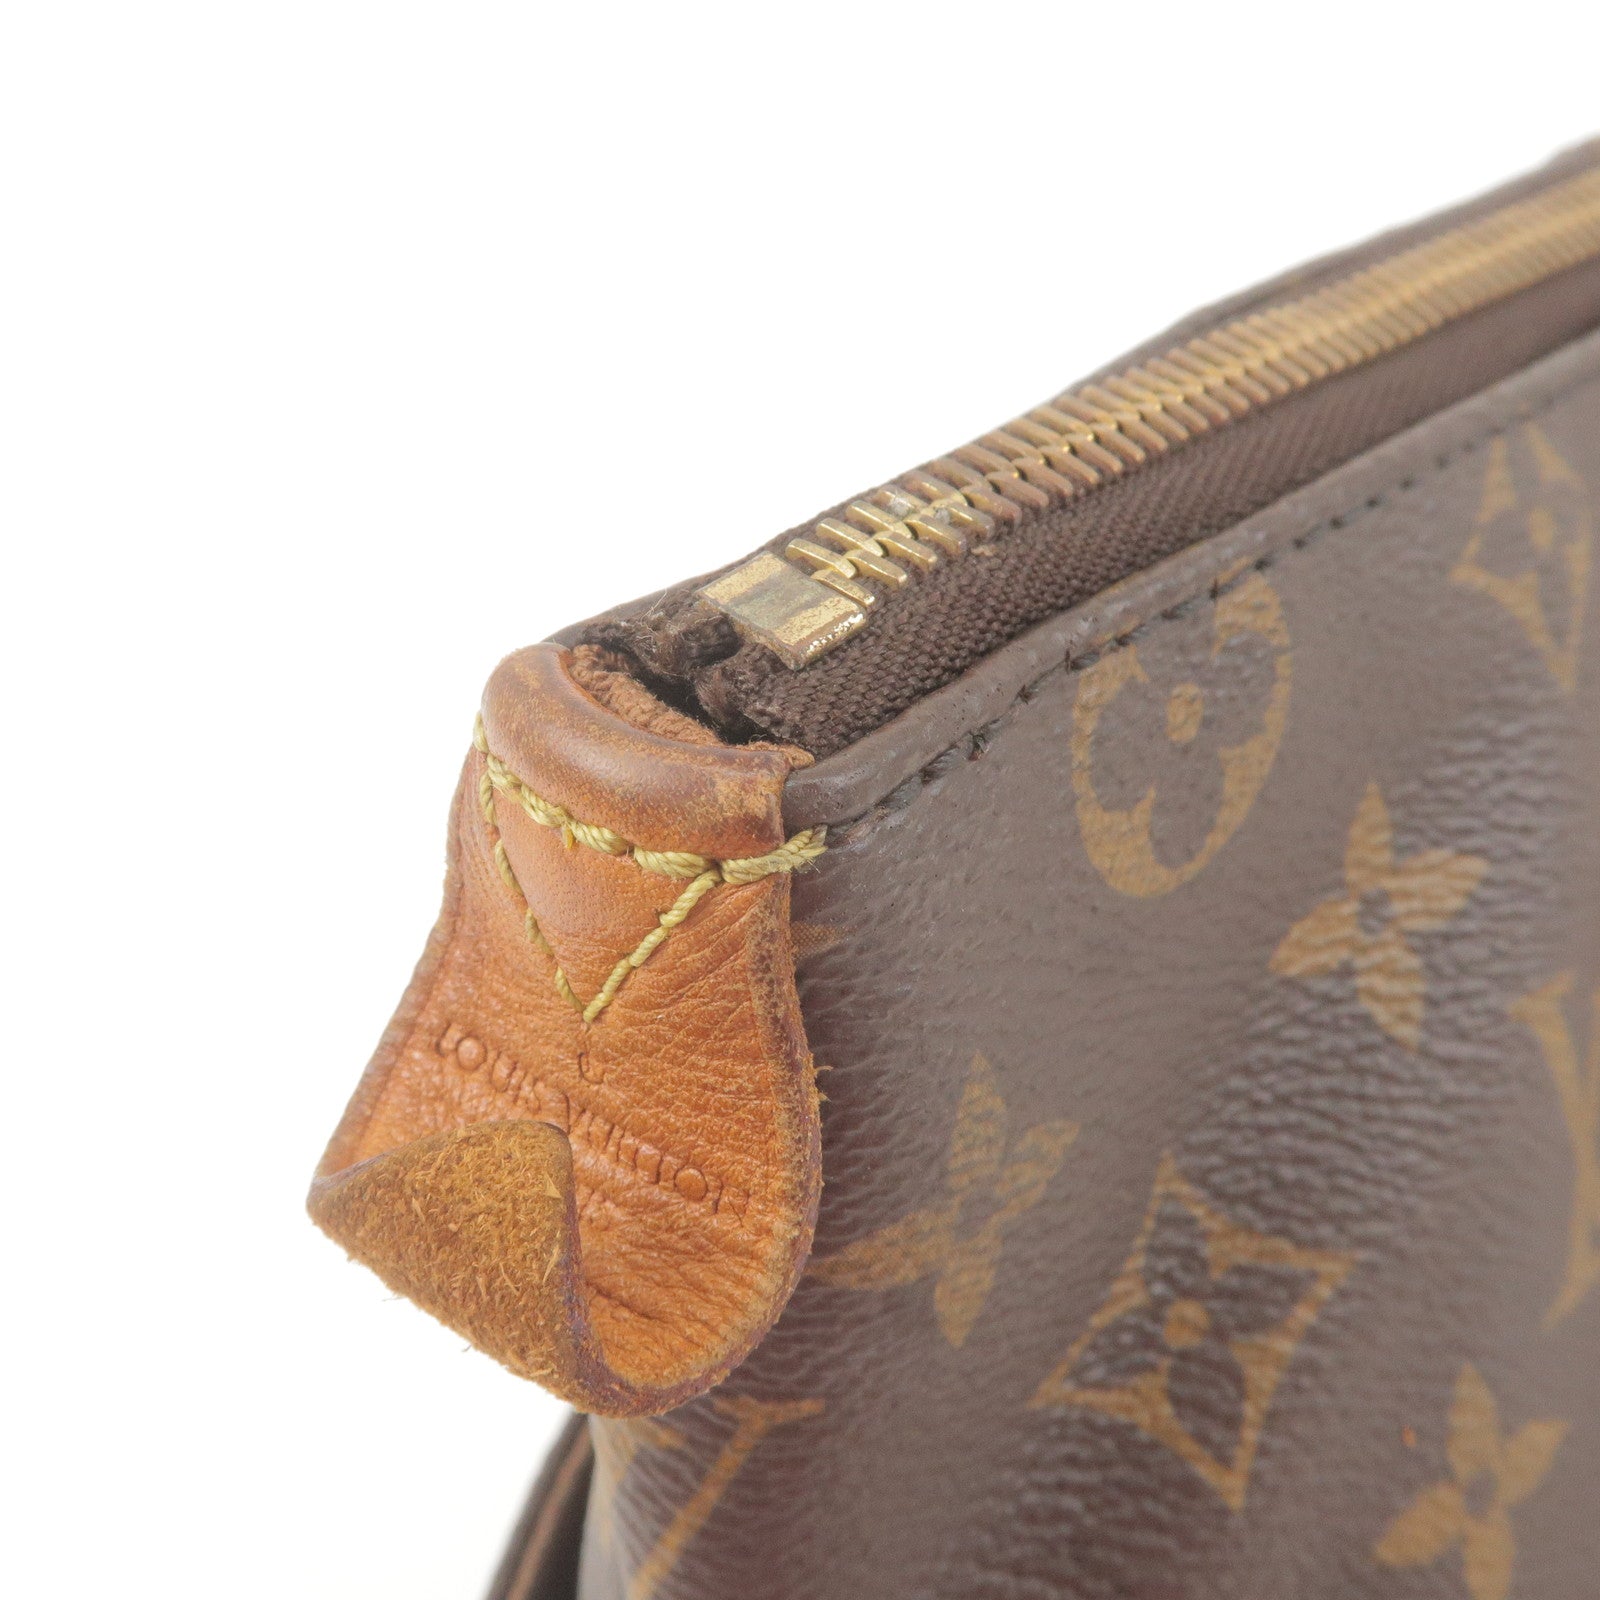 Louis-Vuitton-Monogram-Totally-MM-Tote-Bag-M41015 – dct-ep_vintage